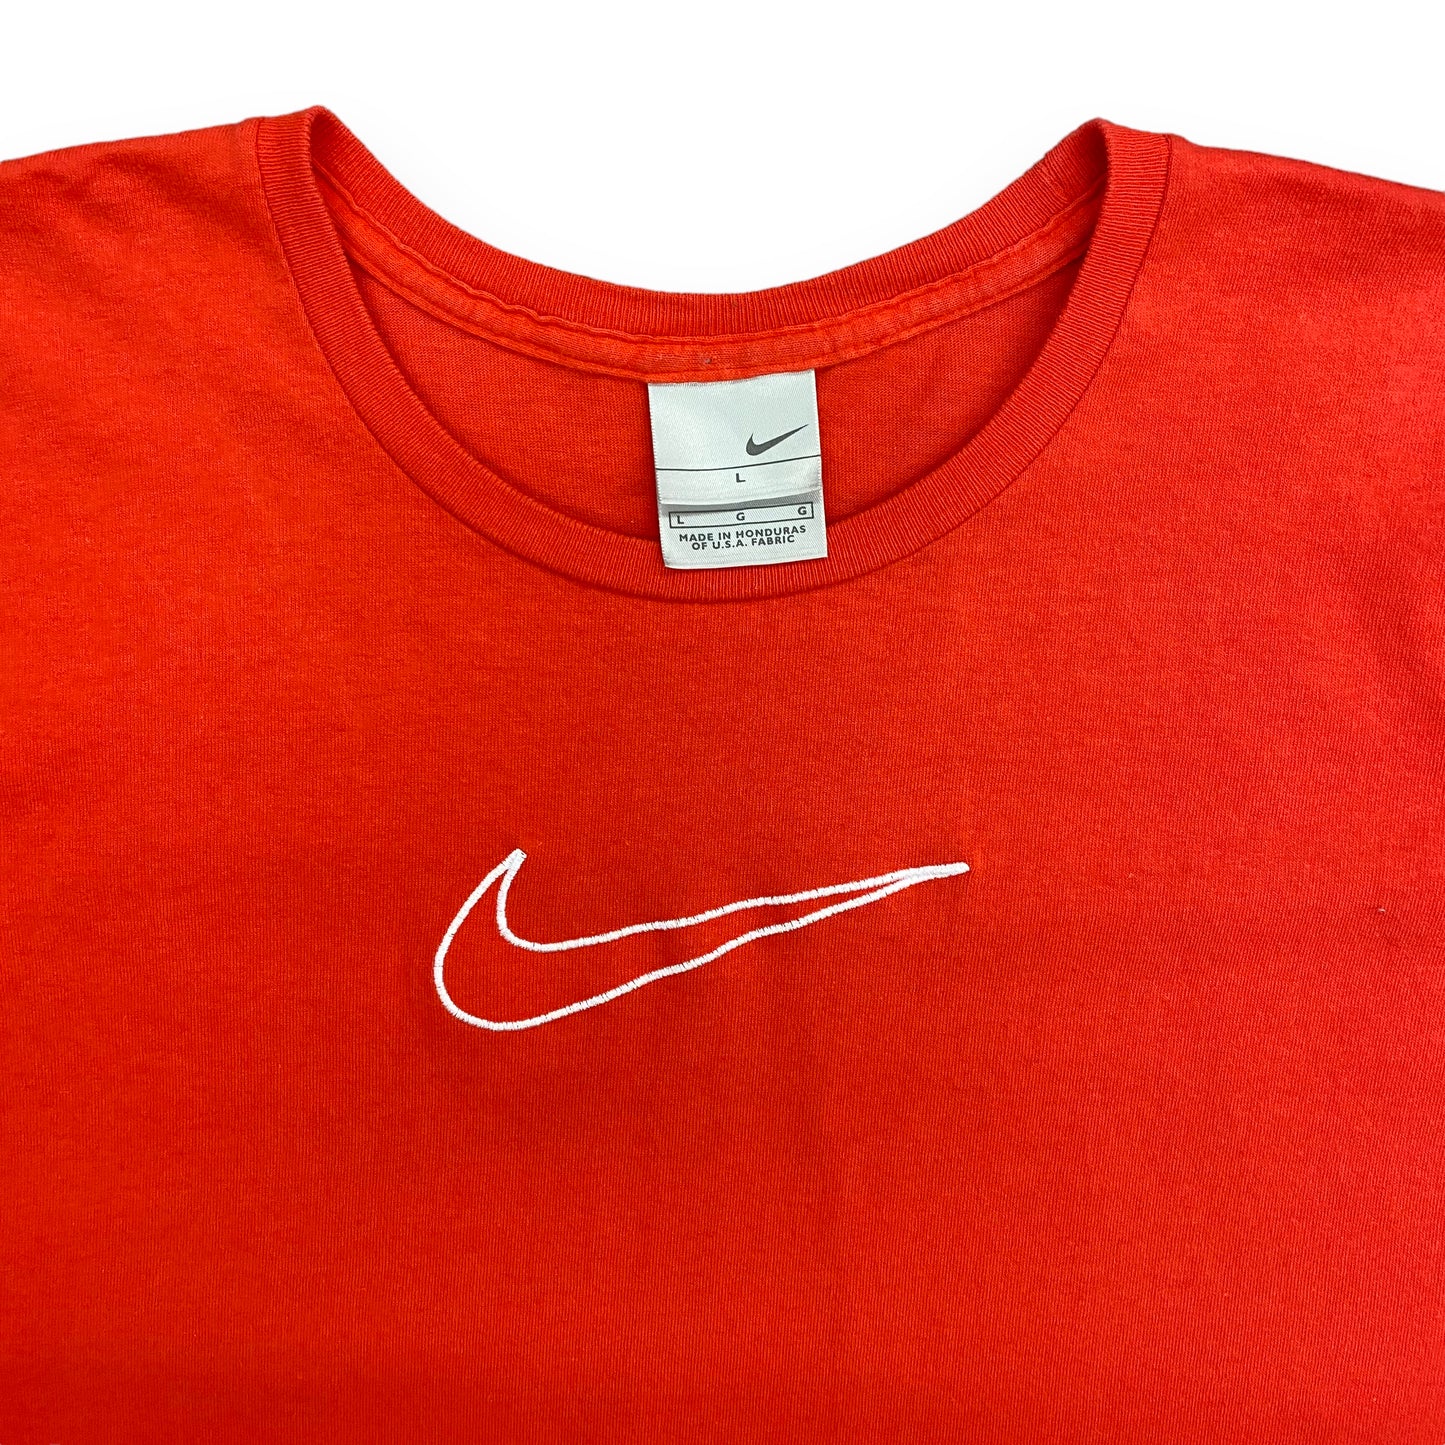 Early 2000s Nike Essential Red Logo Tee - Size Large